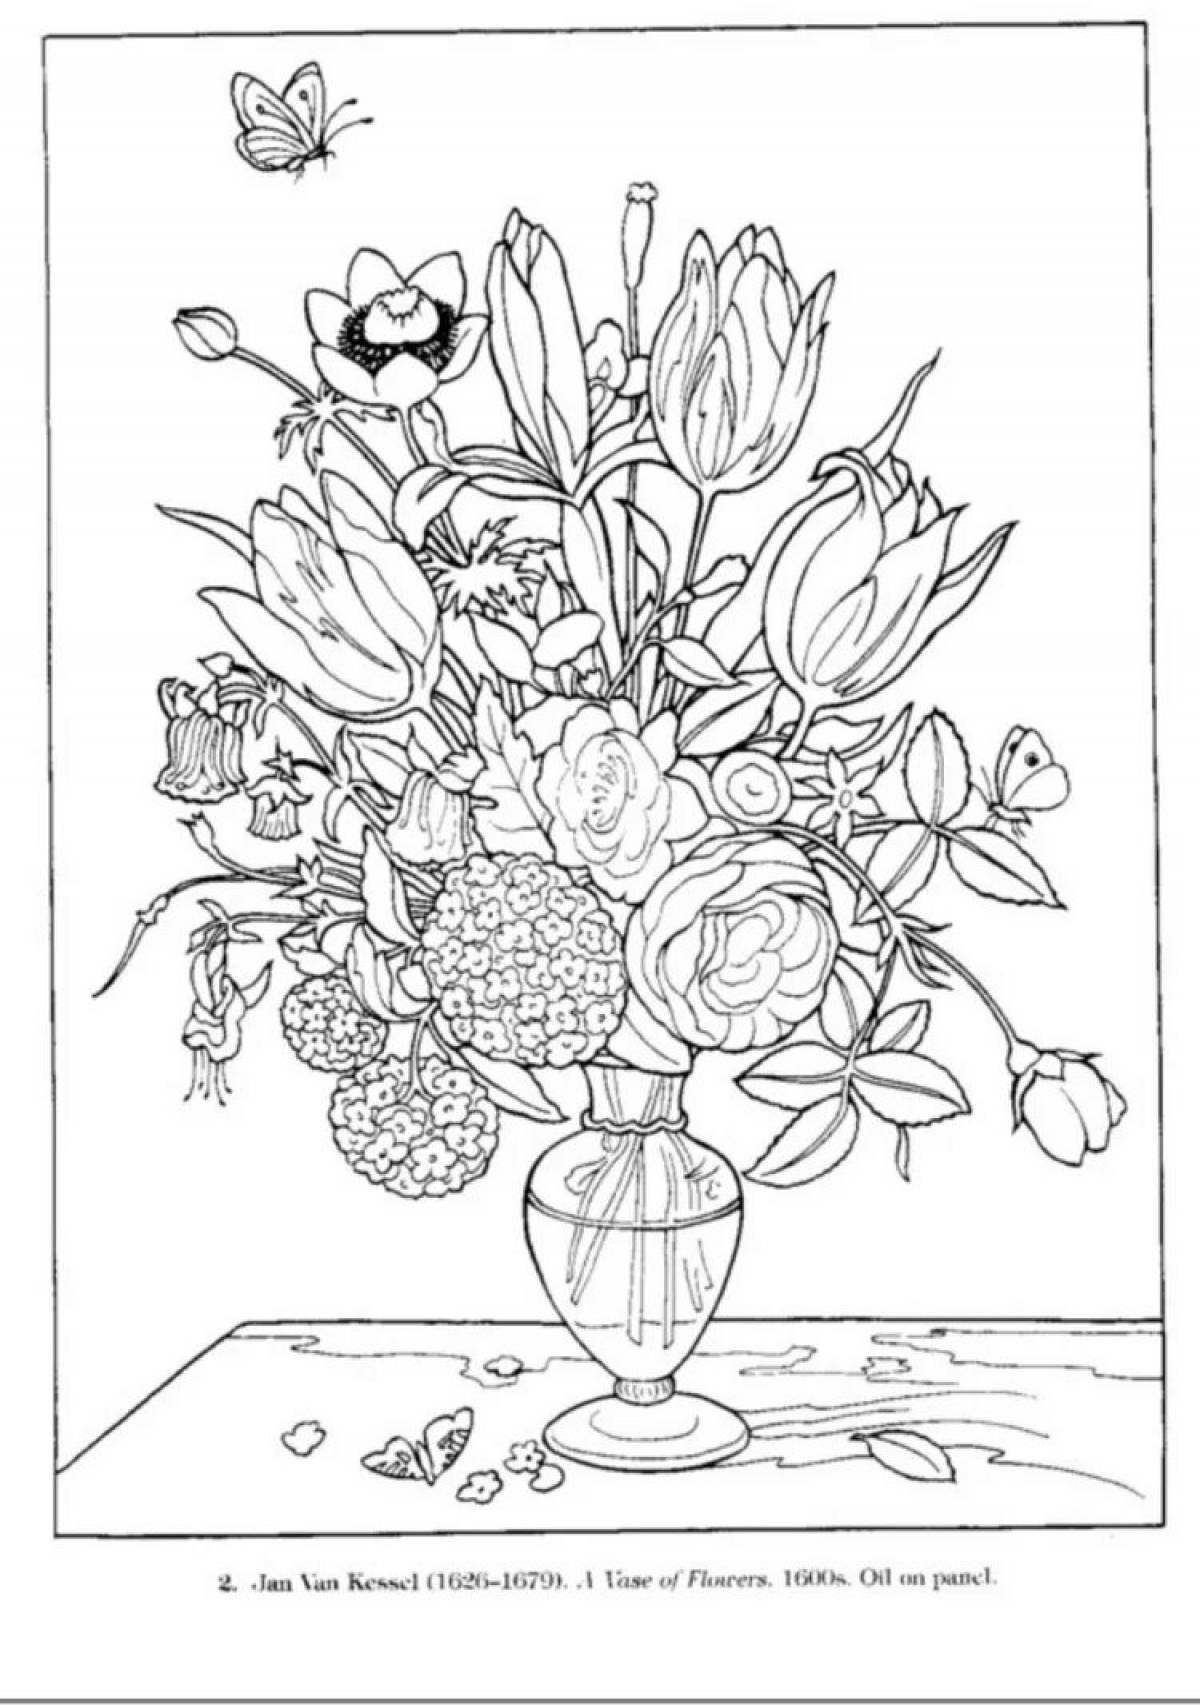 Coloring book a fascinating bouquet of flowers in a vase